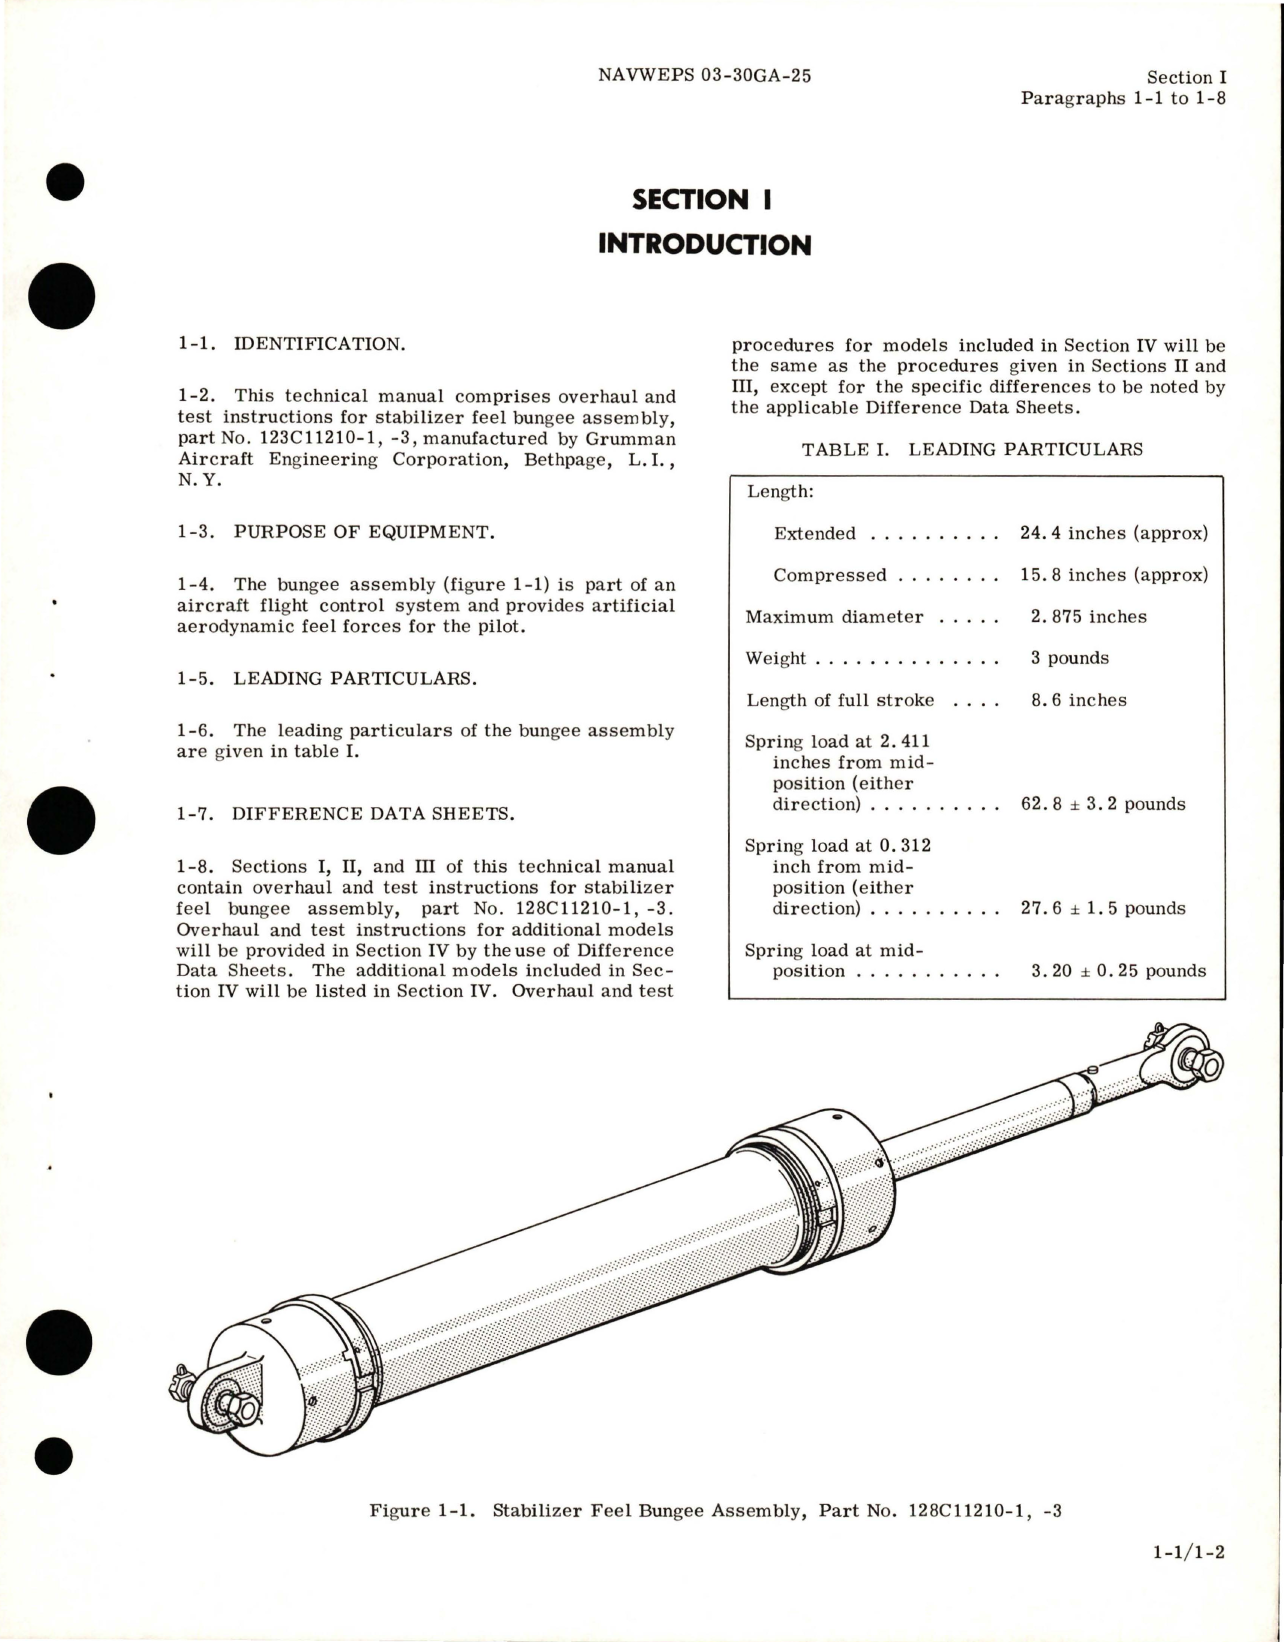 Sample page 5 from AirCorps Library document: Overhaul Instructions for Stabilizer Feel Bungee Assy - Part 128C11210-1 and 128C11210-3 